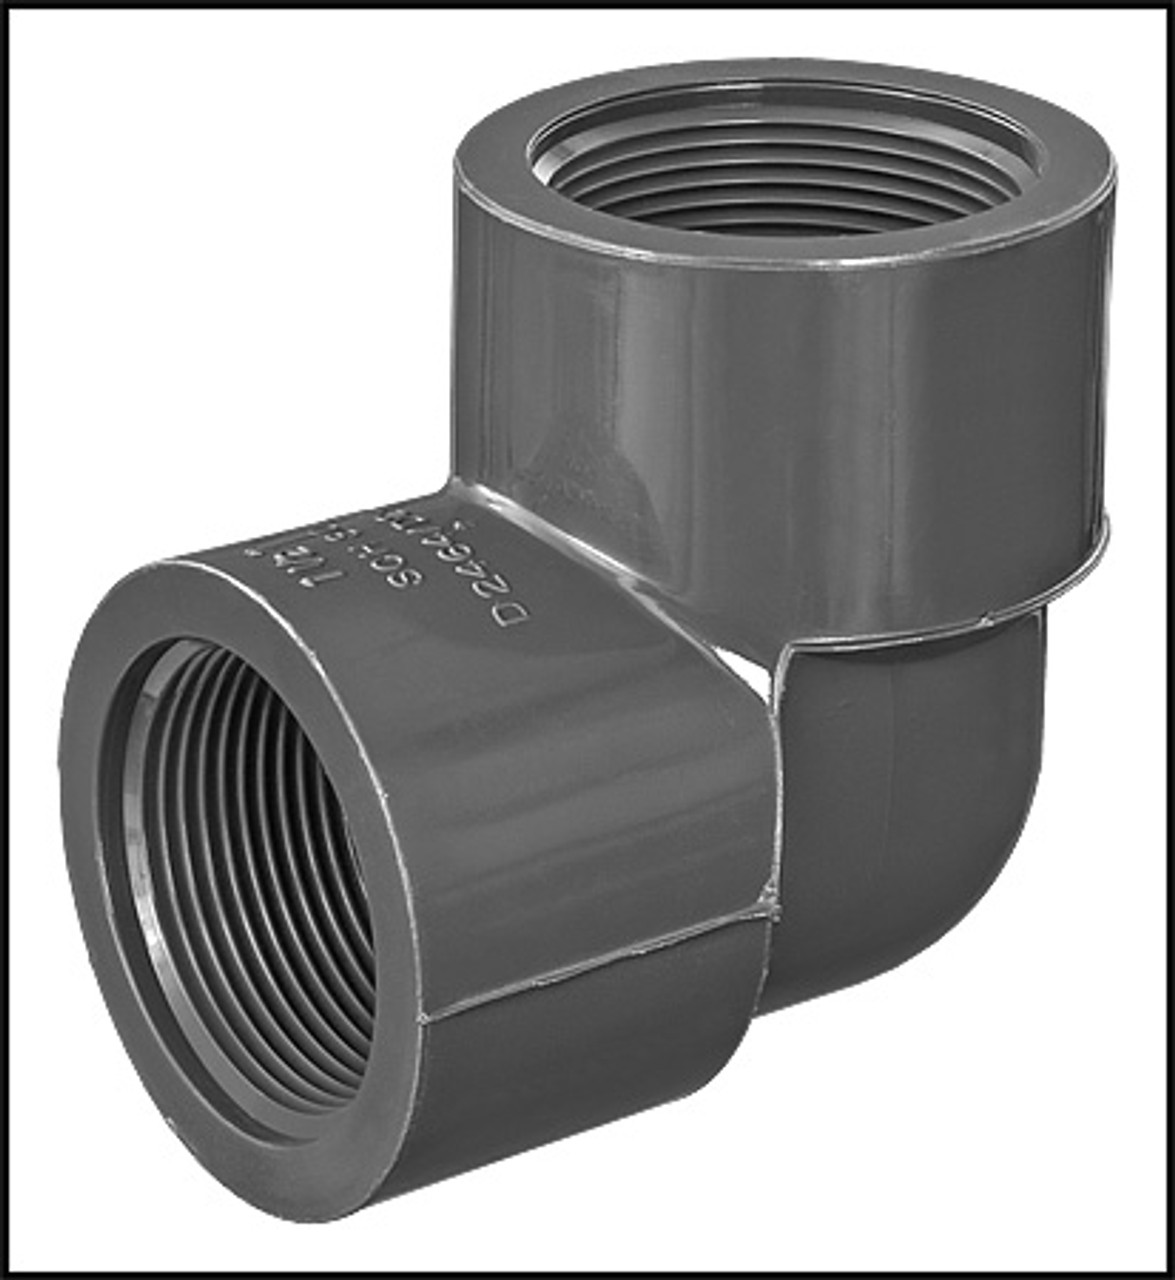 Lasco 1 1/2" 90 Degree Elbow Pipe Fitting SCH 80 FPT X FPT (#808-015)